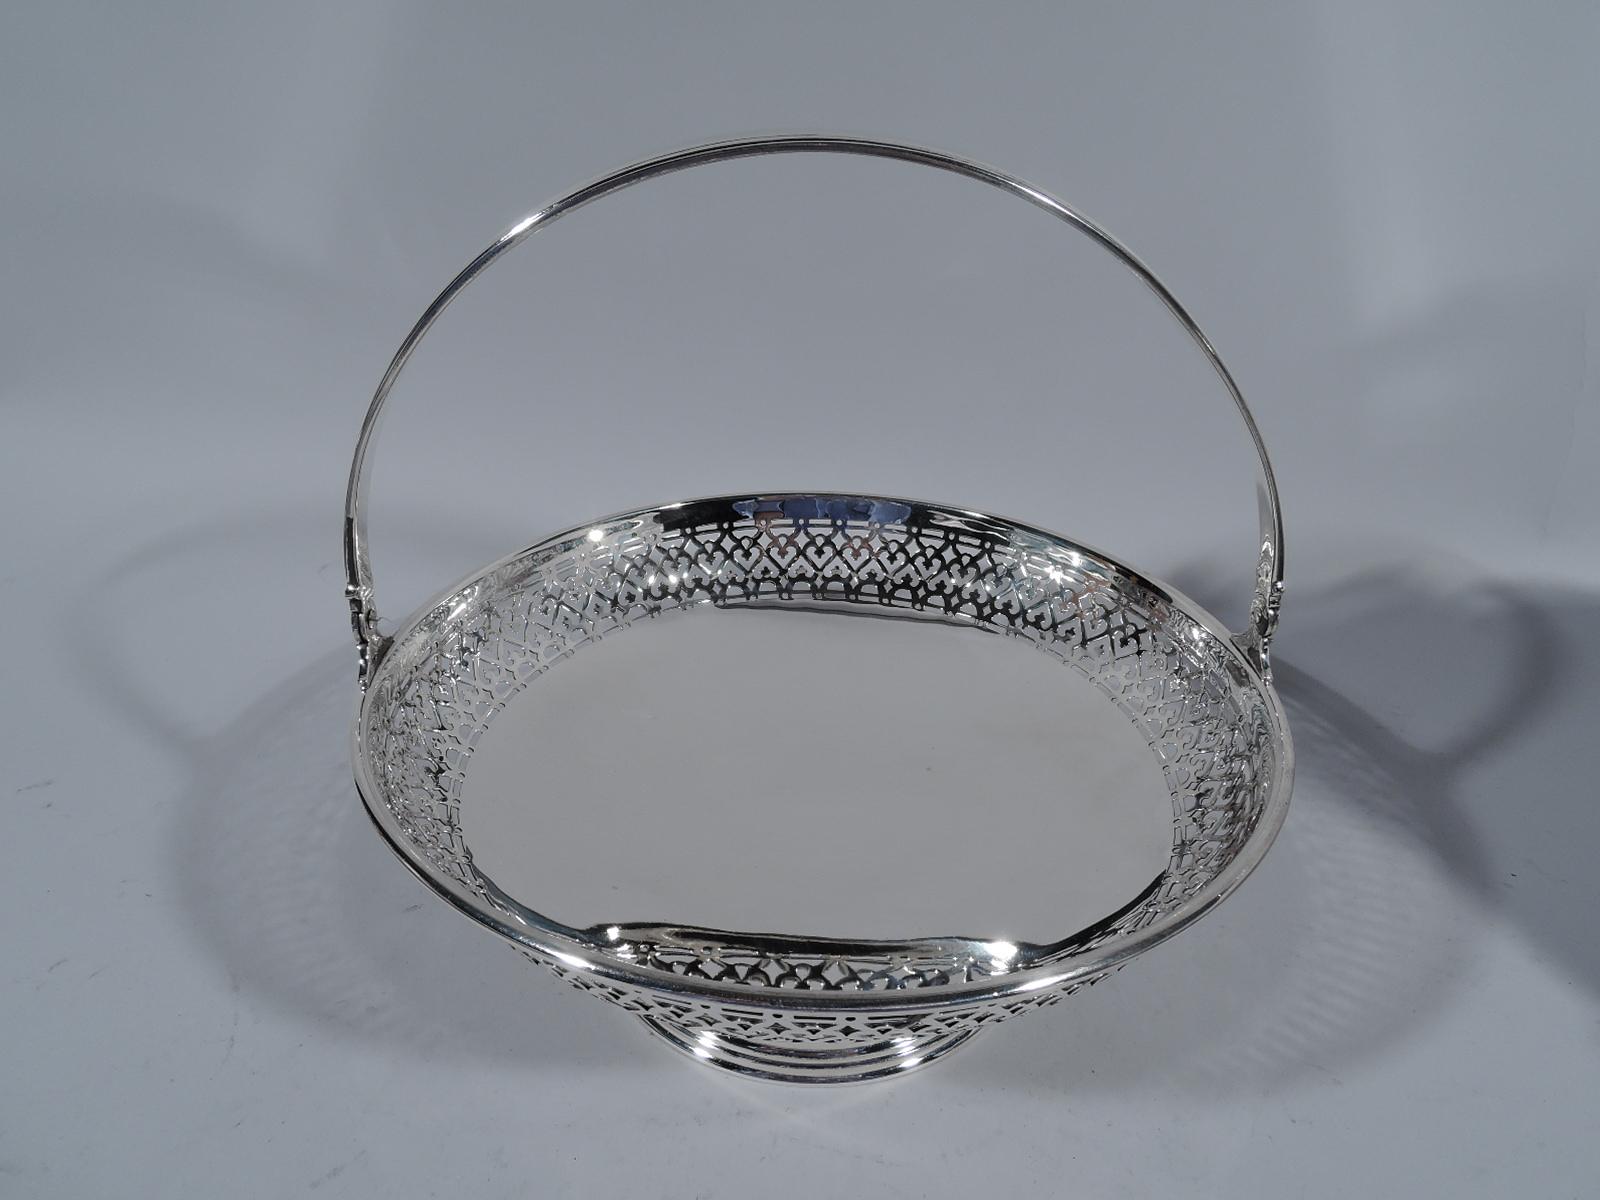 Edwardian sterling silver basket. Made by Tiffany & Co. in New York, circa 1912. Round and shallow bowl with solid well and wide band of pierced scrollwork. C-scroll handle tapering and hinged. Stepped and raised foot. Fully marked including pattern